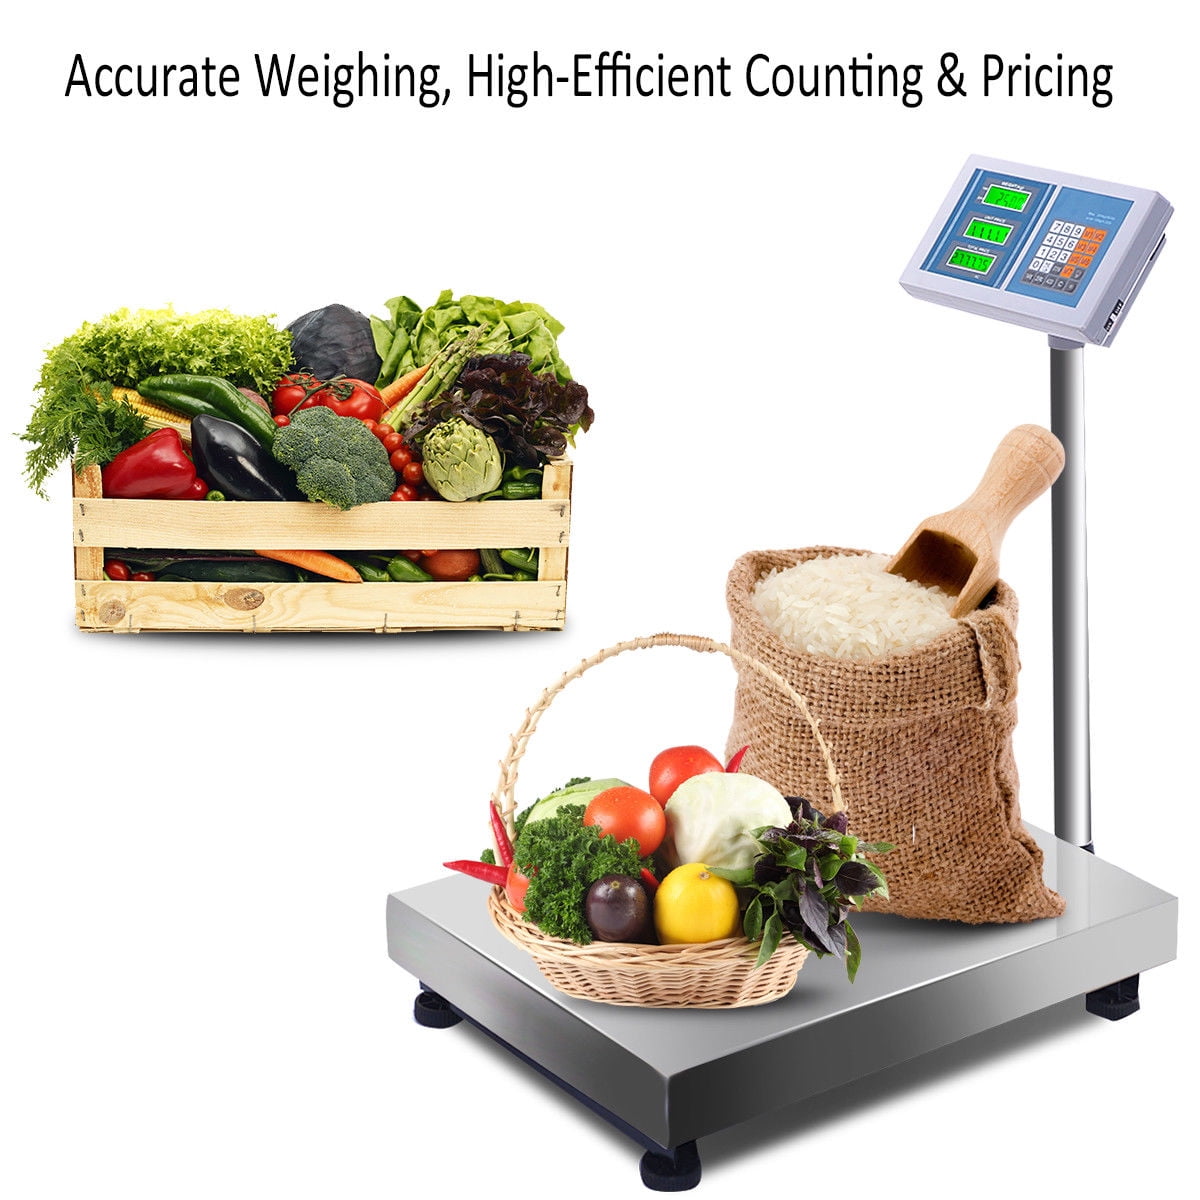 Silver Giantex 660lbs Weight Computing Digital Scale Floor Platform Scale for Weighing Luggage Package Shipping Mailing Postal Scale with Accurate LB/KG Price Calculator High-Definition Displa 